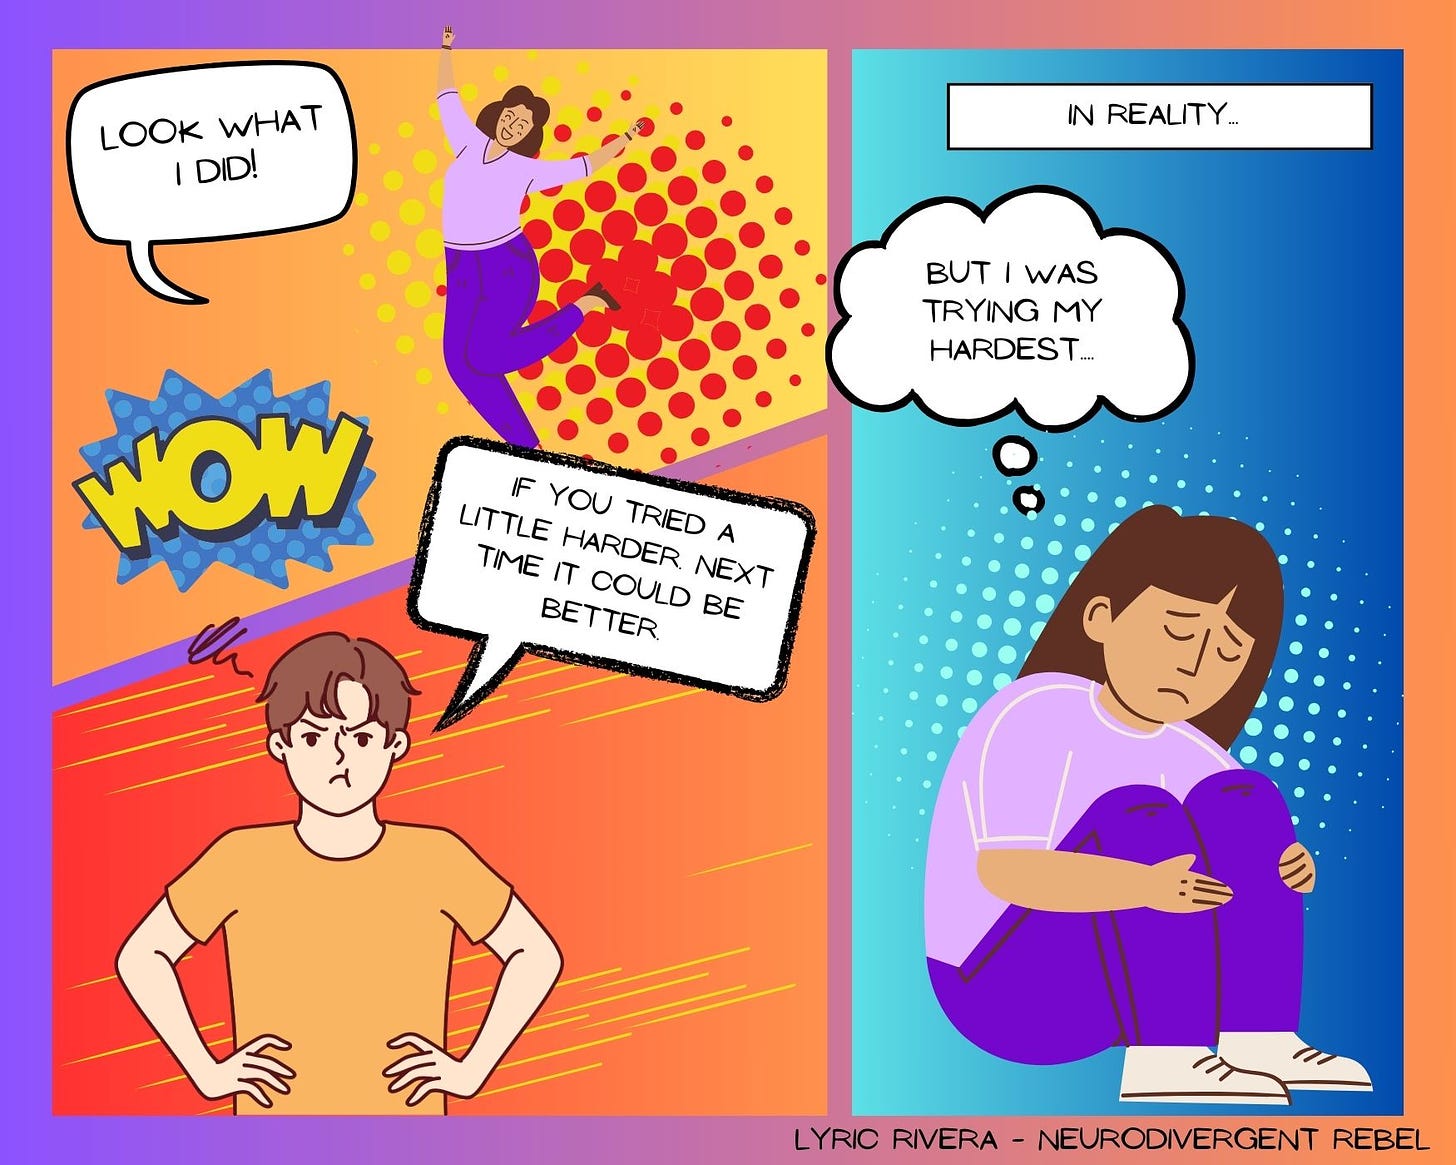 Brightly colored 3 panel comic: Panel one a person in a purple outfit is jumping with excitement saying “LOOK WHAT I DID”. Panel 2: a person in an orange shirt with hands on their hips is annoyed saying “If you tried a little harder next time it could be better.” Panel 3: The person from panel one is sitting on the floor sad, with a thought bubble above them that reads “but I was trying my hardest.”